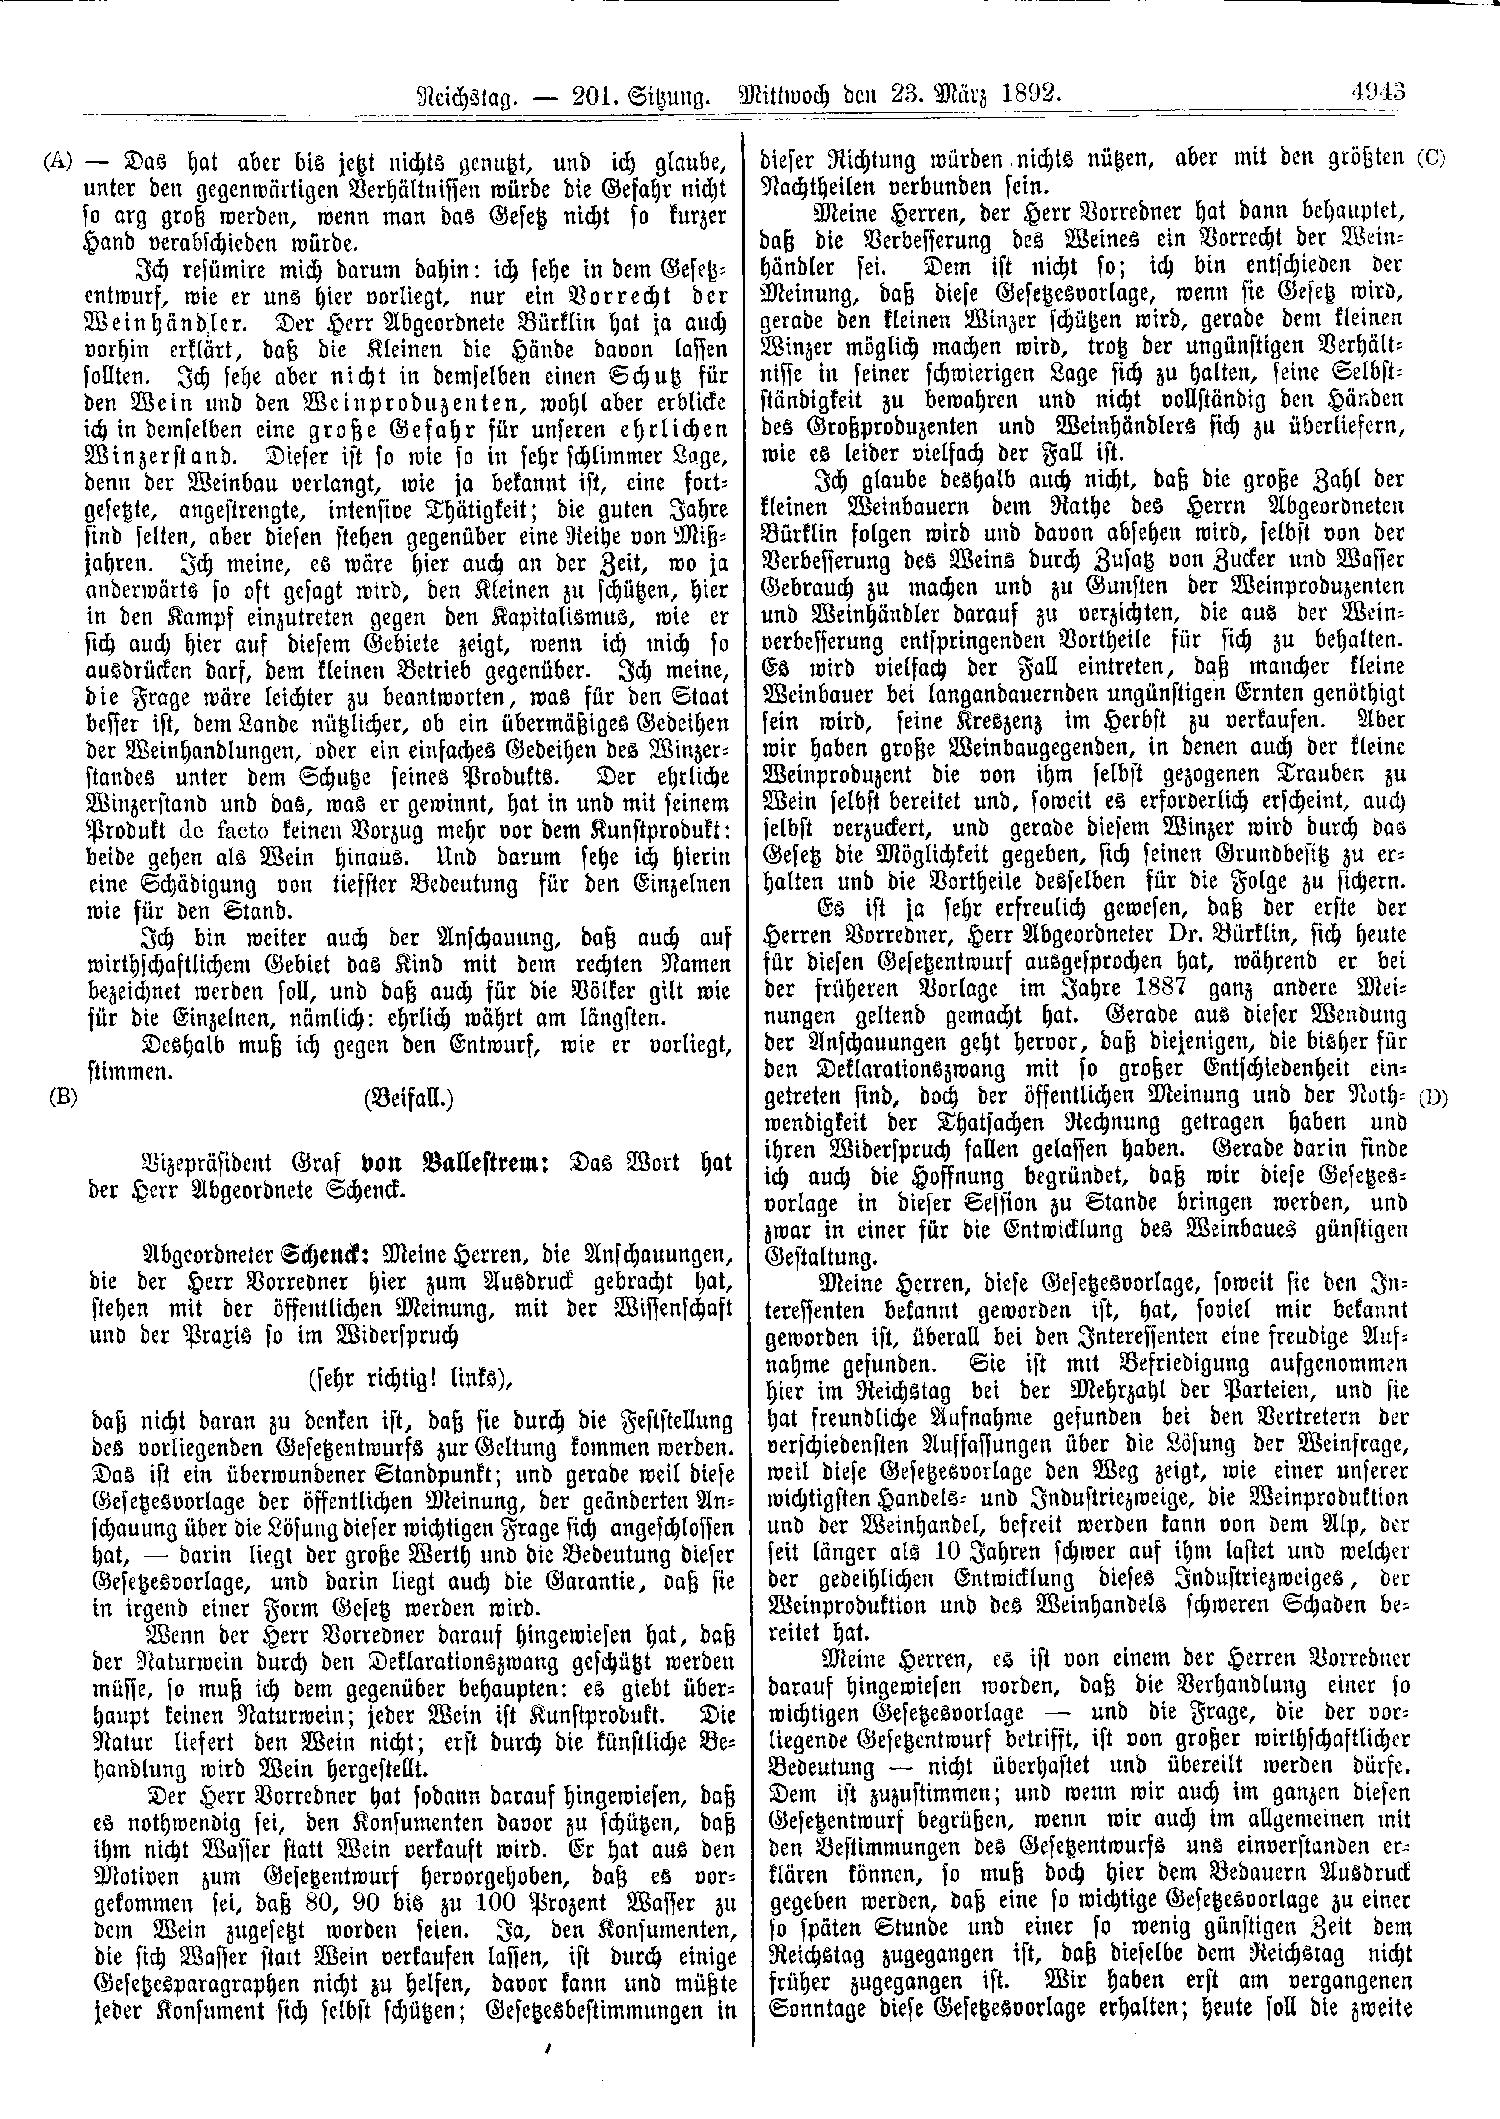 Scan of page 4943